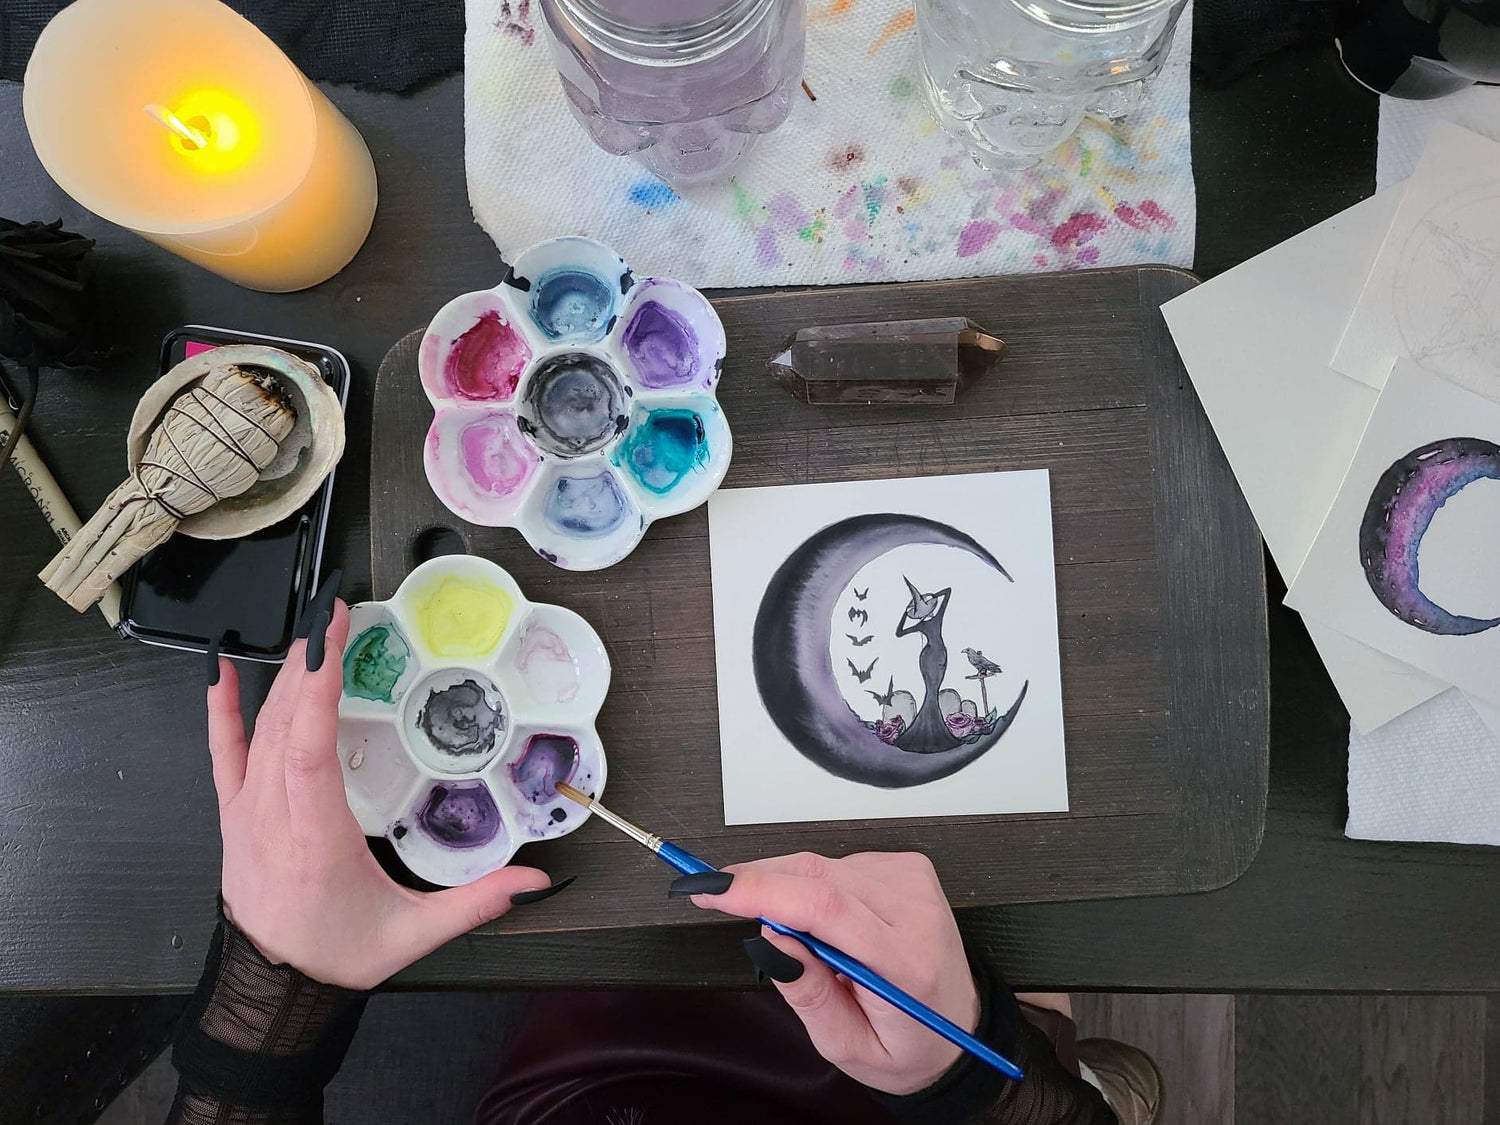 Watercolor artist holding paint with a moon and witchy woman on the canvas. Magic items and art supplies surround the studio space.